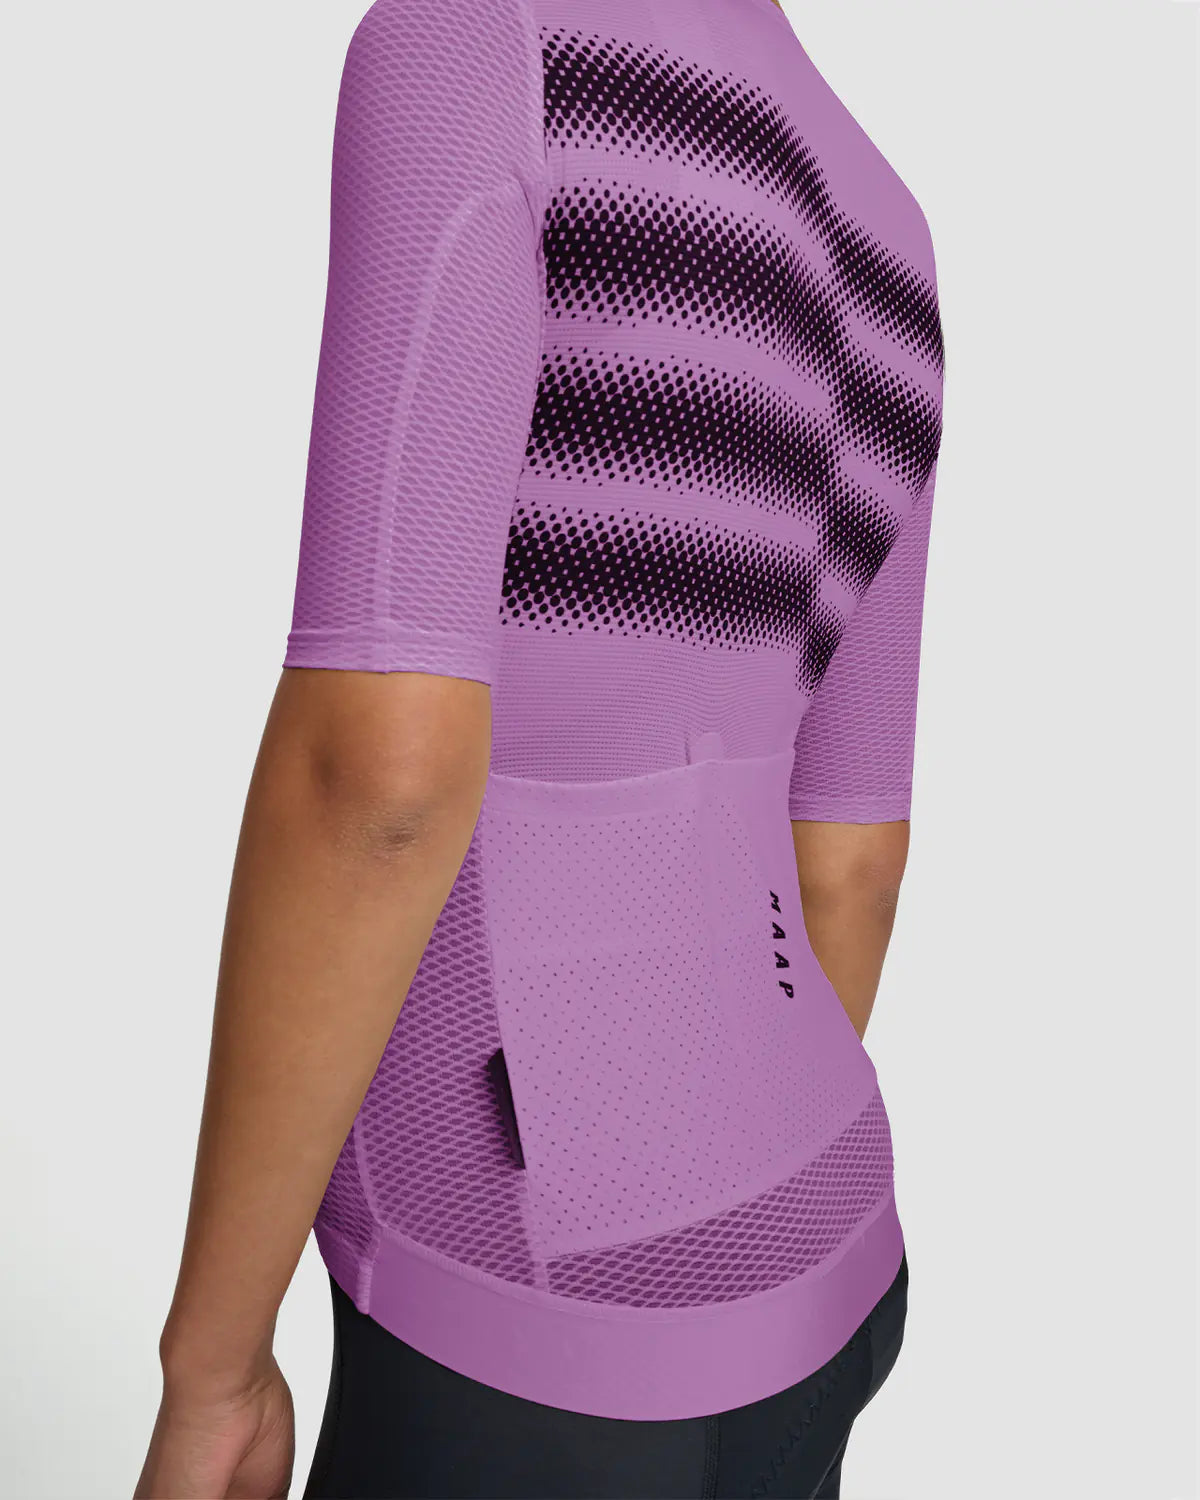 MAAP Blurred Out Ultralight Pro Jersey Plum レディースサイクルジャージ  | CYCLISM